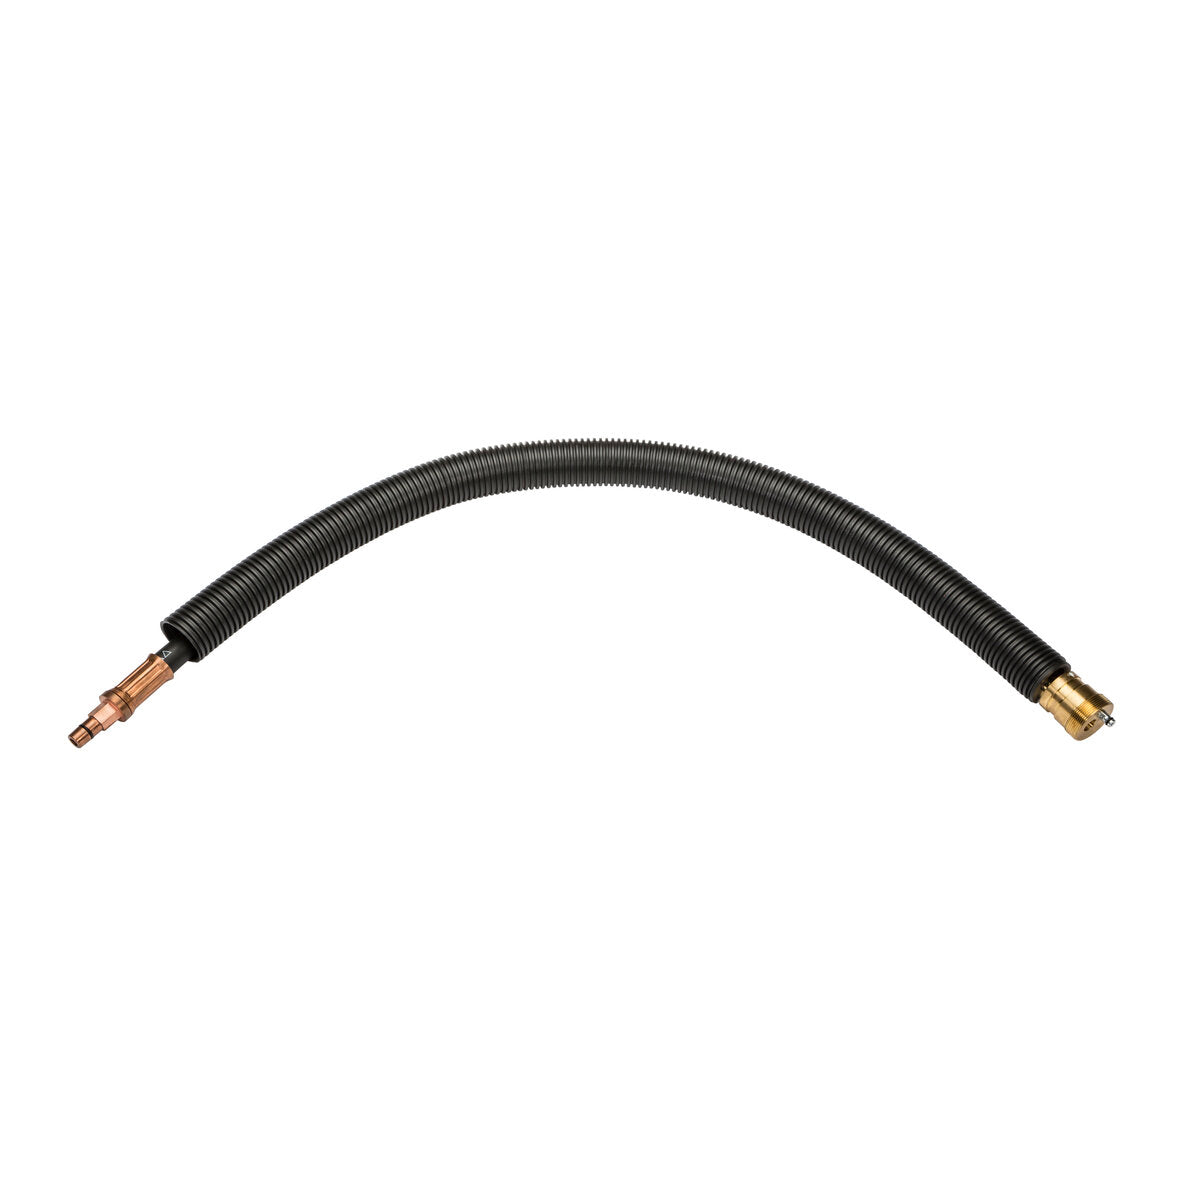 Lincoln Electric - AutoDrive® S Cable ABB 2600ID-15/1.85 - KP4305-2600ID-185